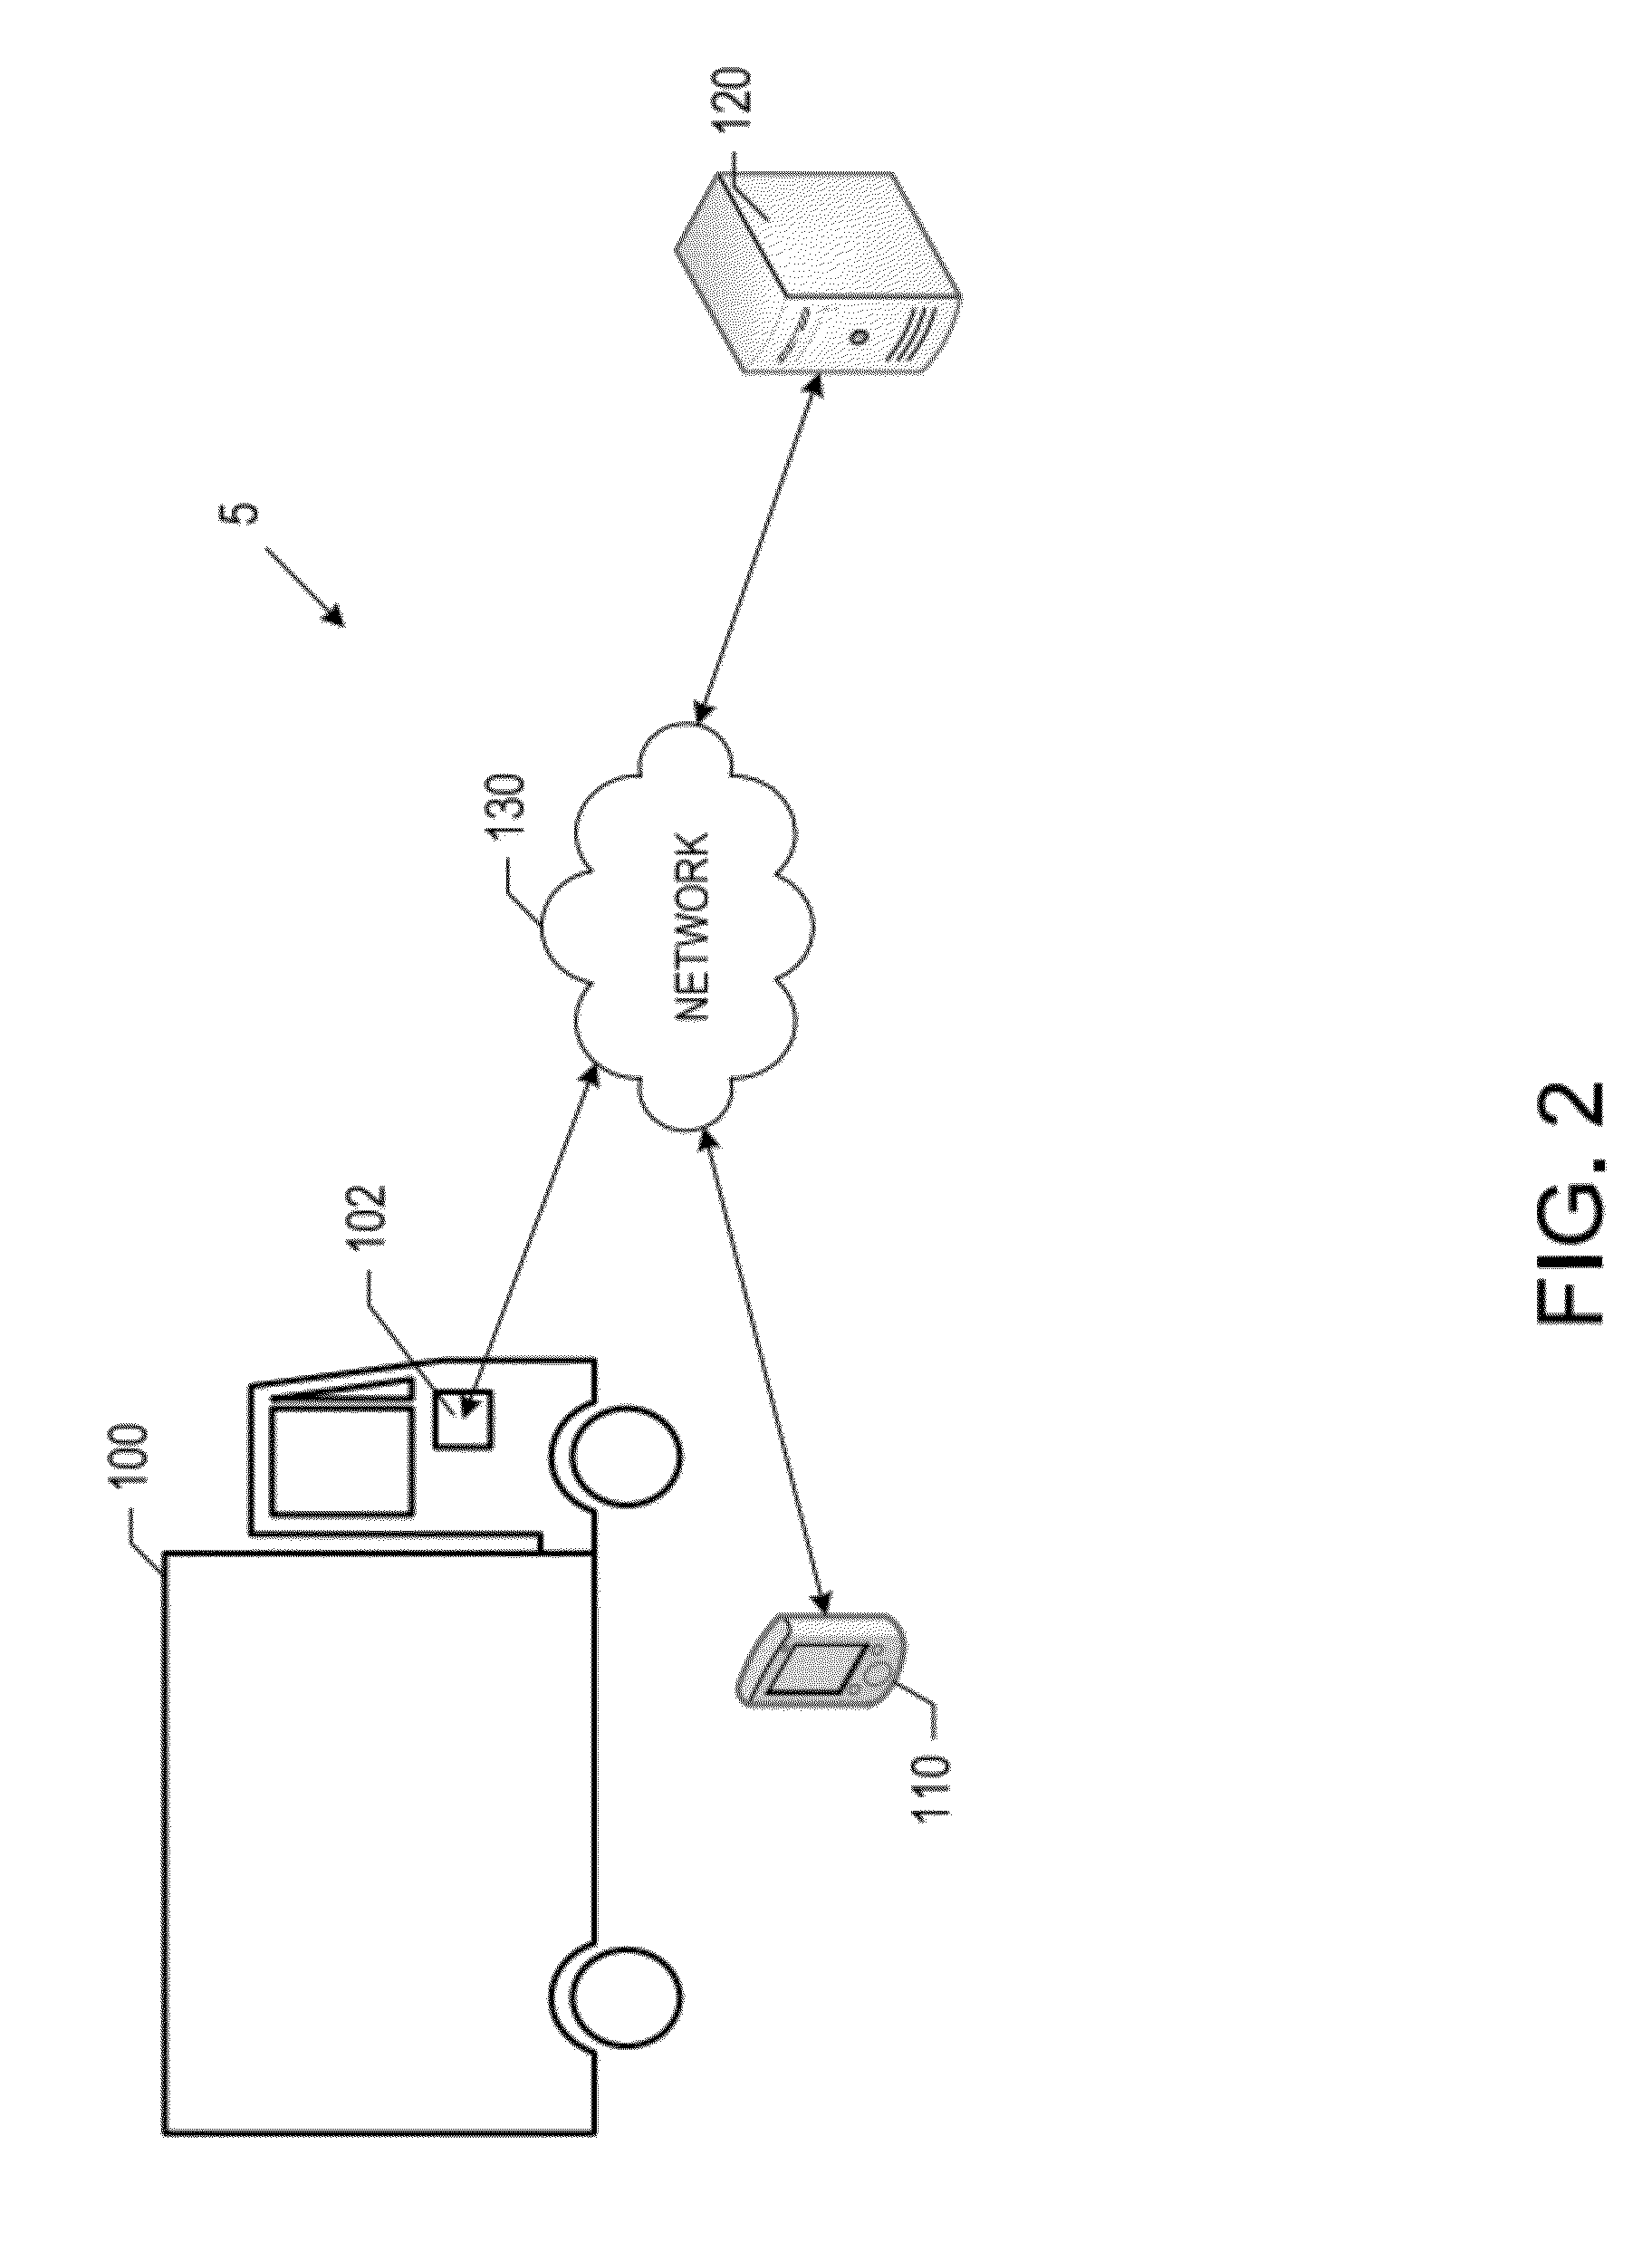 Systems and methods for assessing vehicle and vehicle operator efficiency